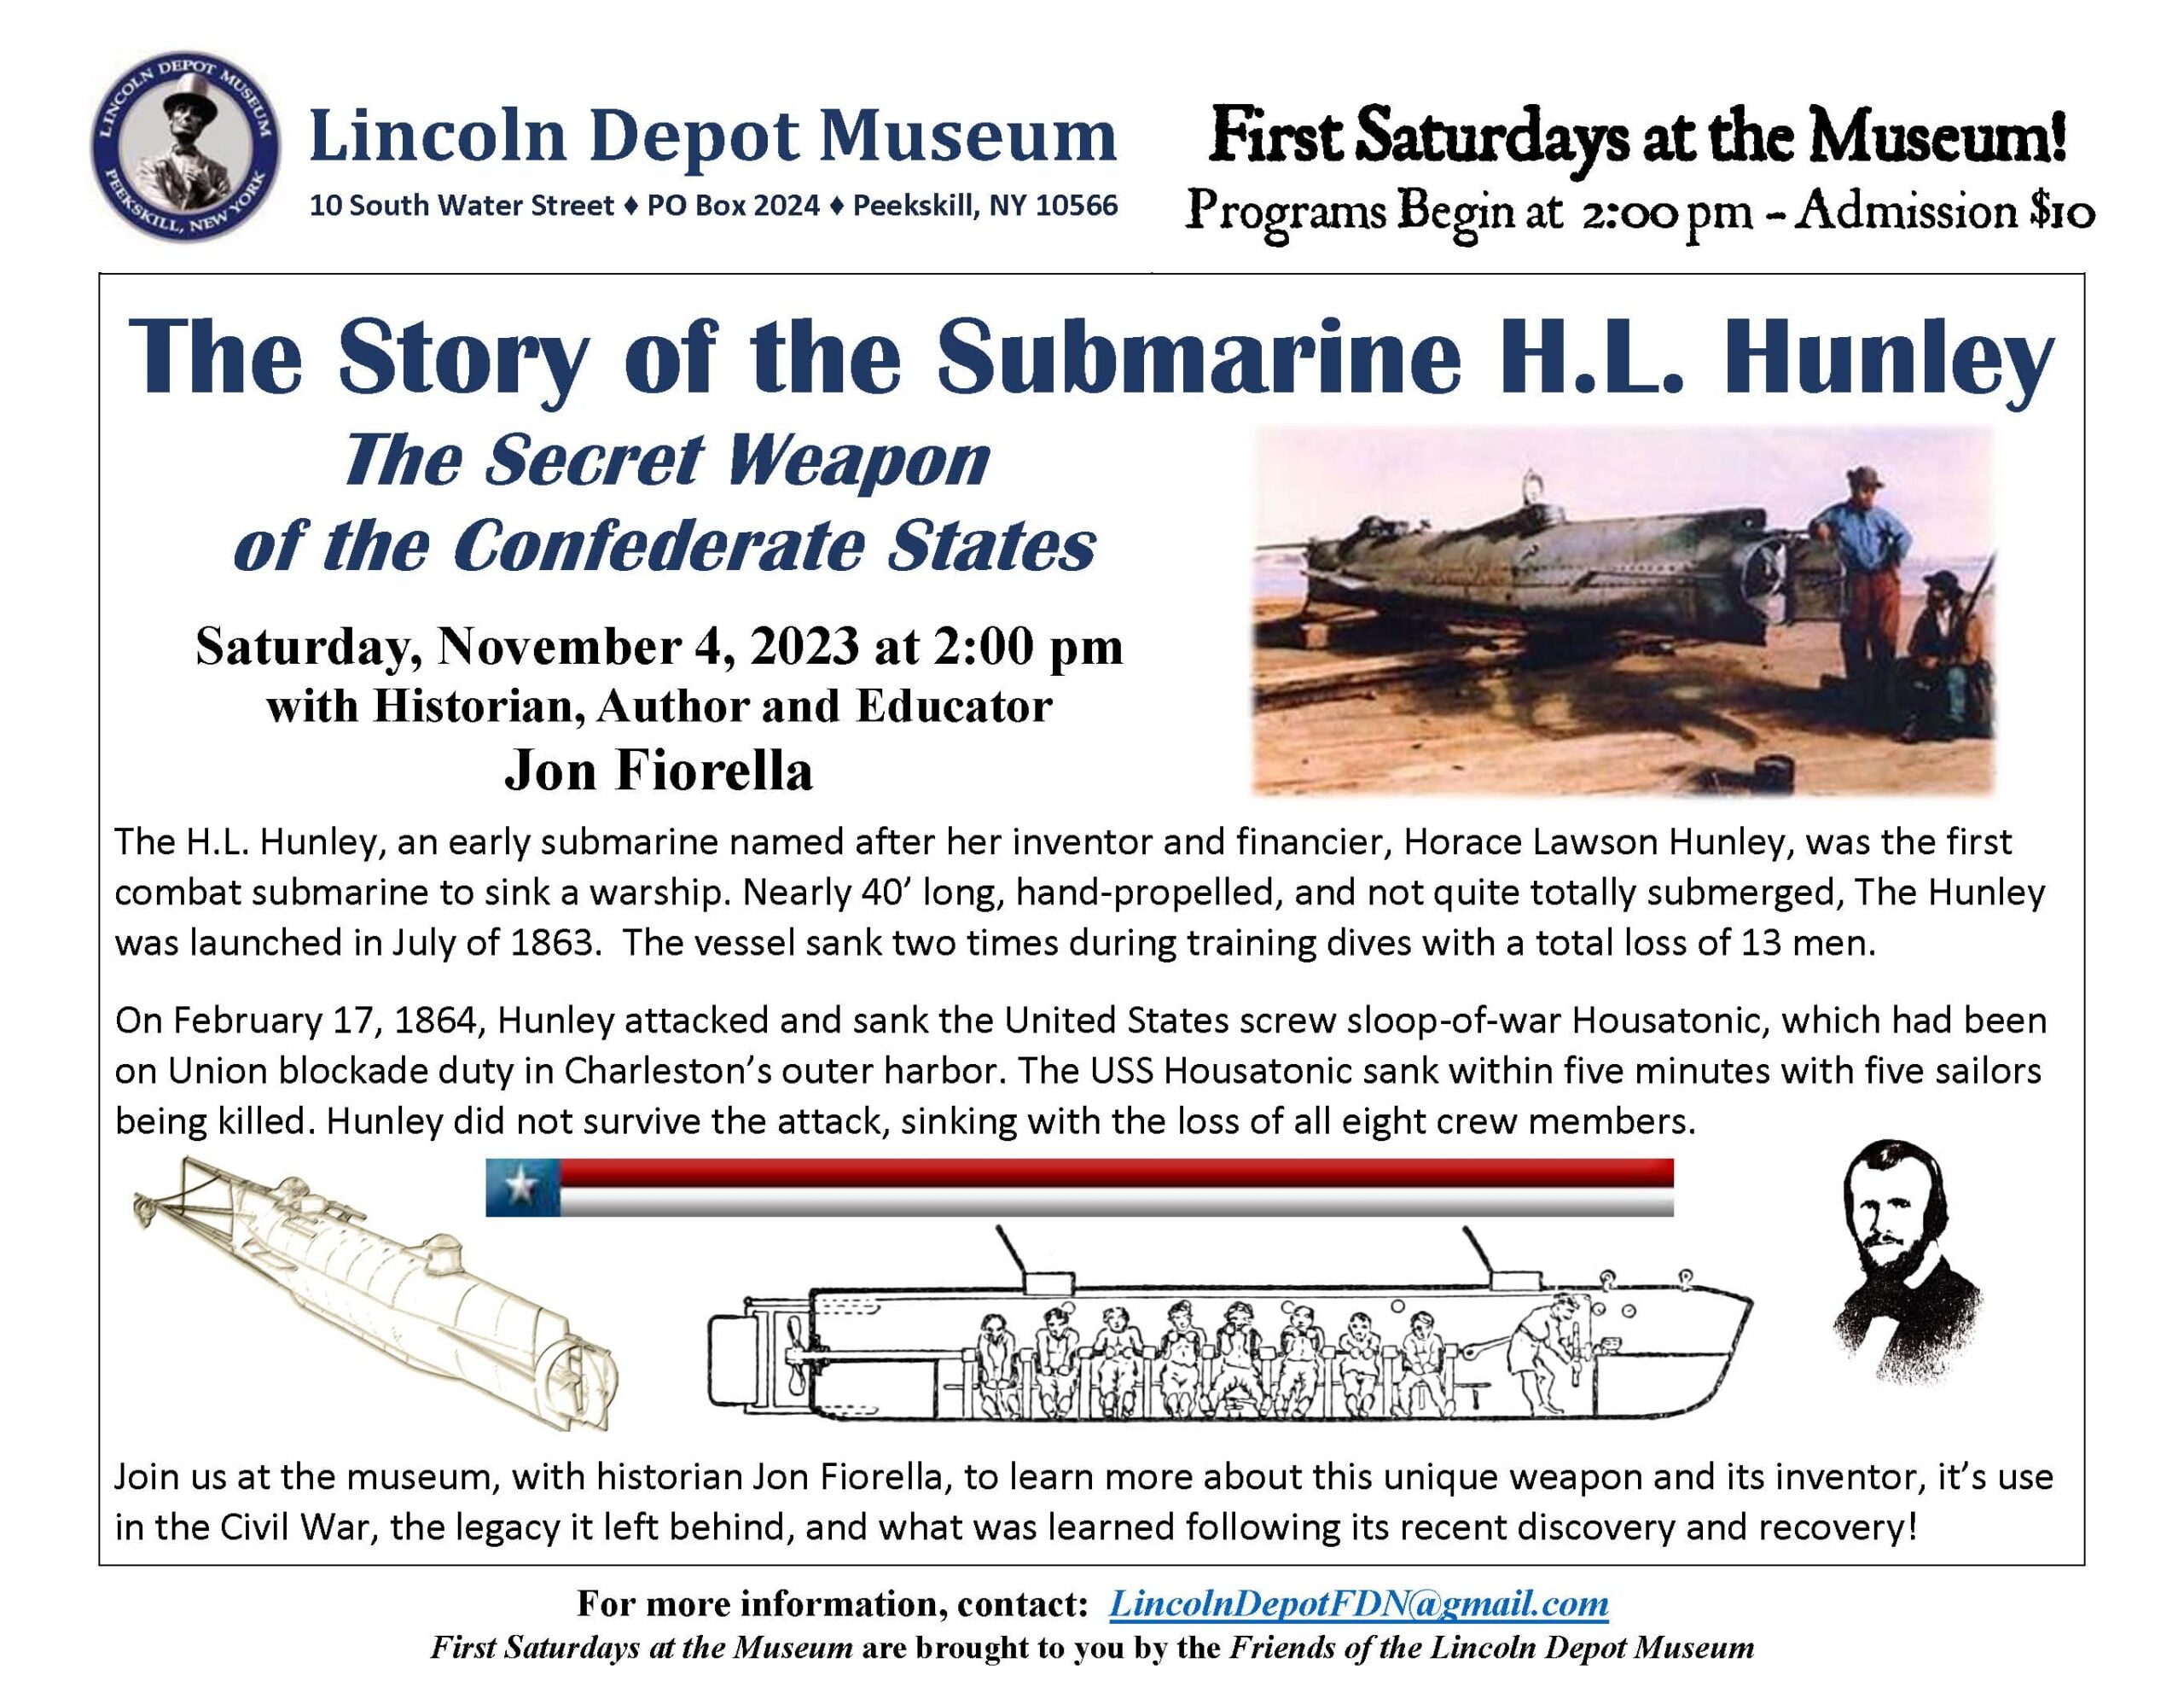 Flier for history talk about Submarine Hunley at Lincoln Museum